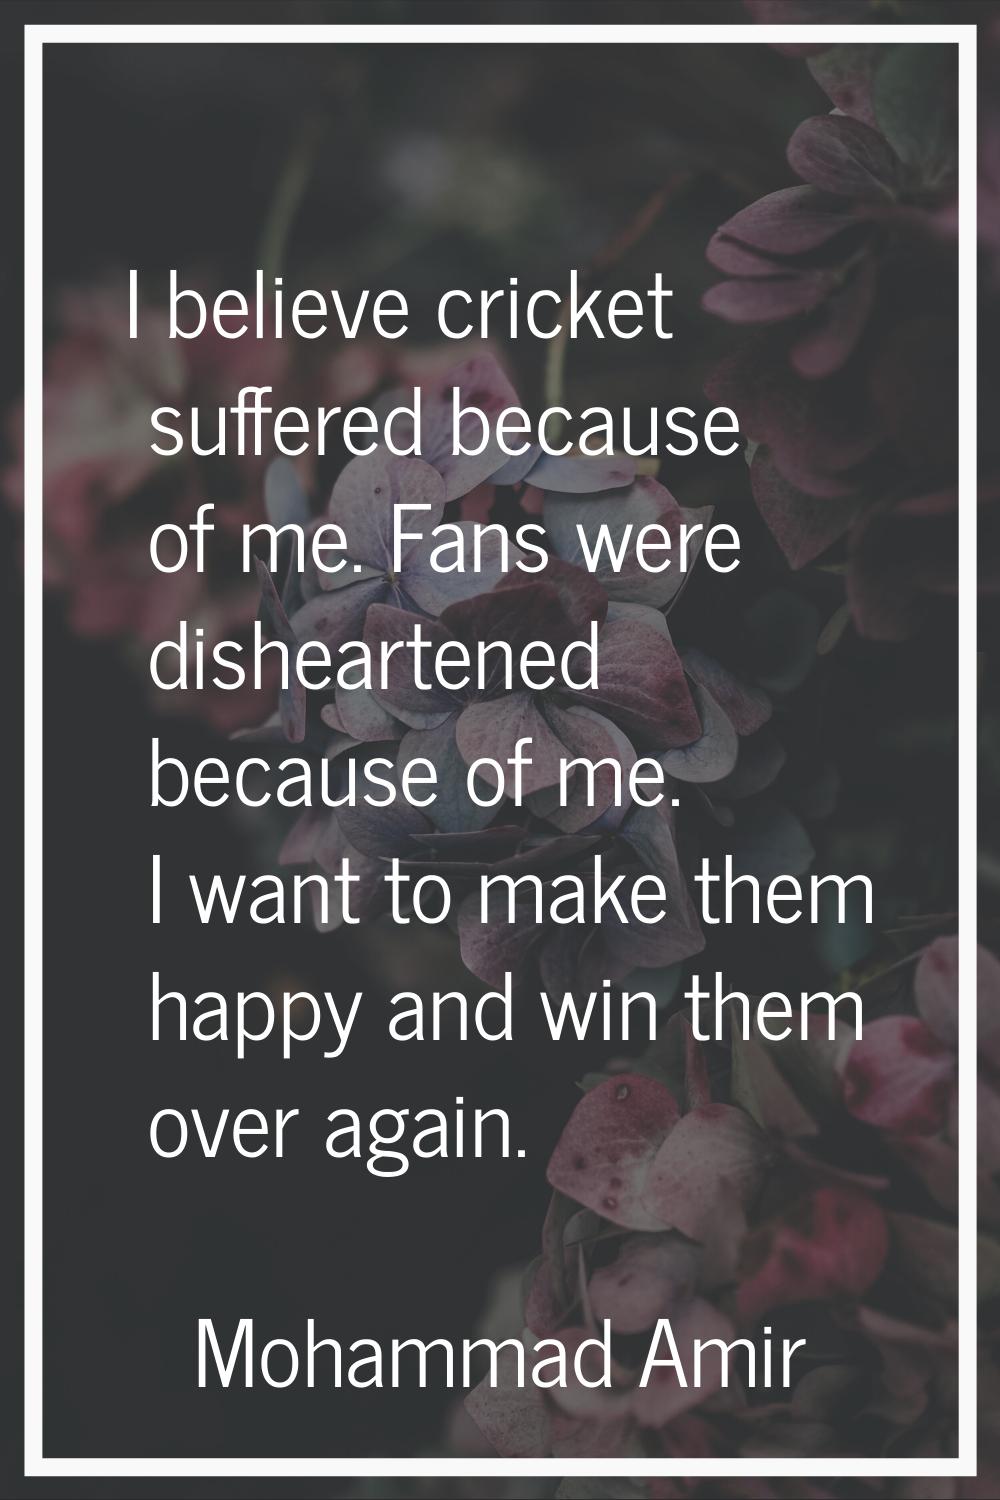 I believe cricket suffered because of me. Fans were disheartened because of me. I want to make them